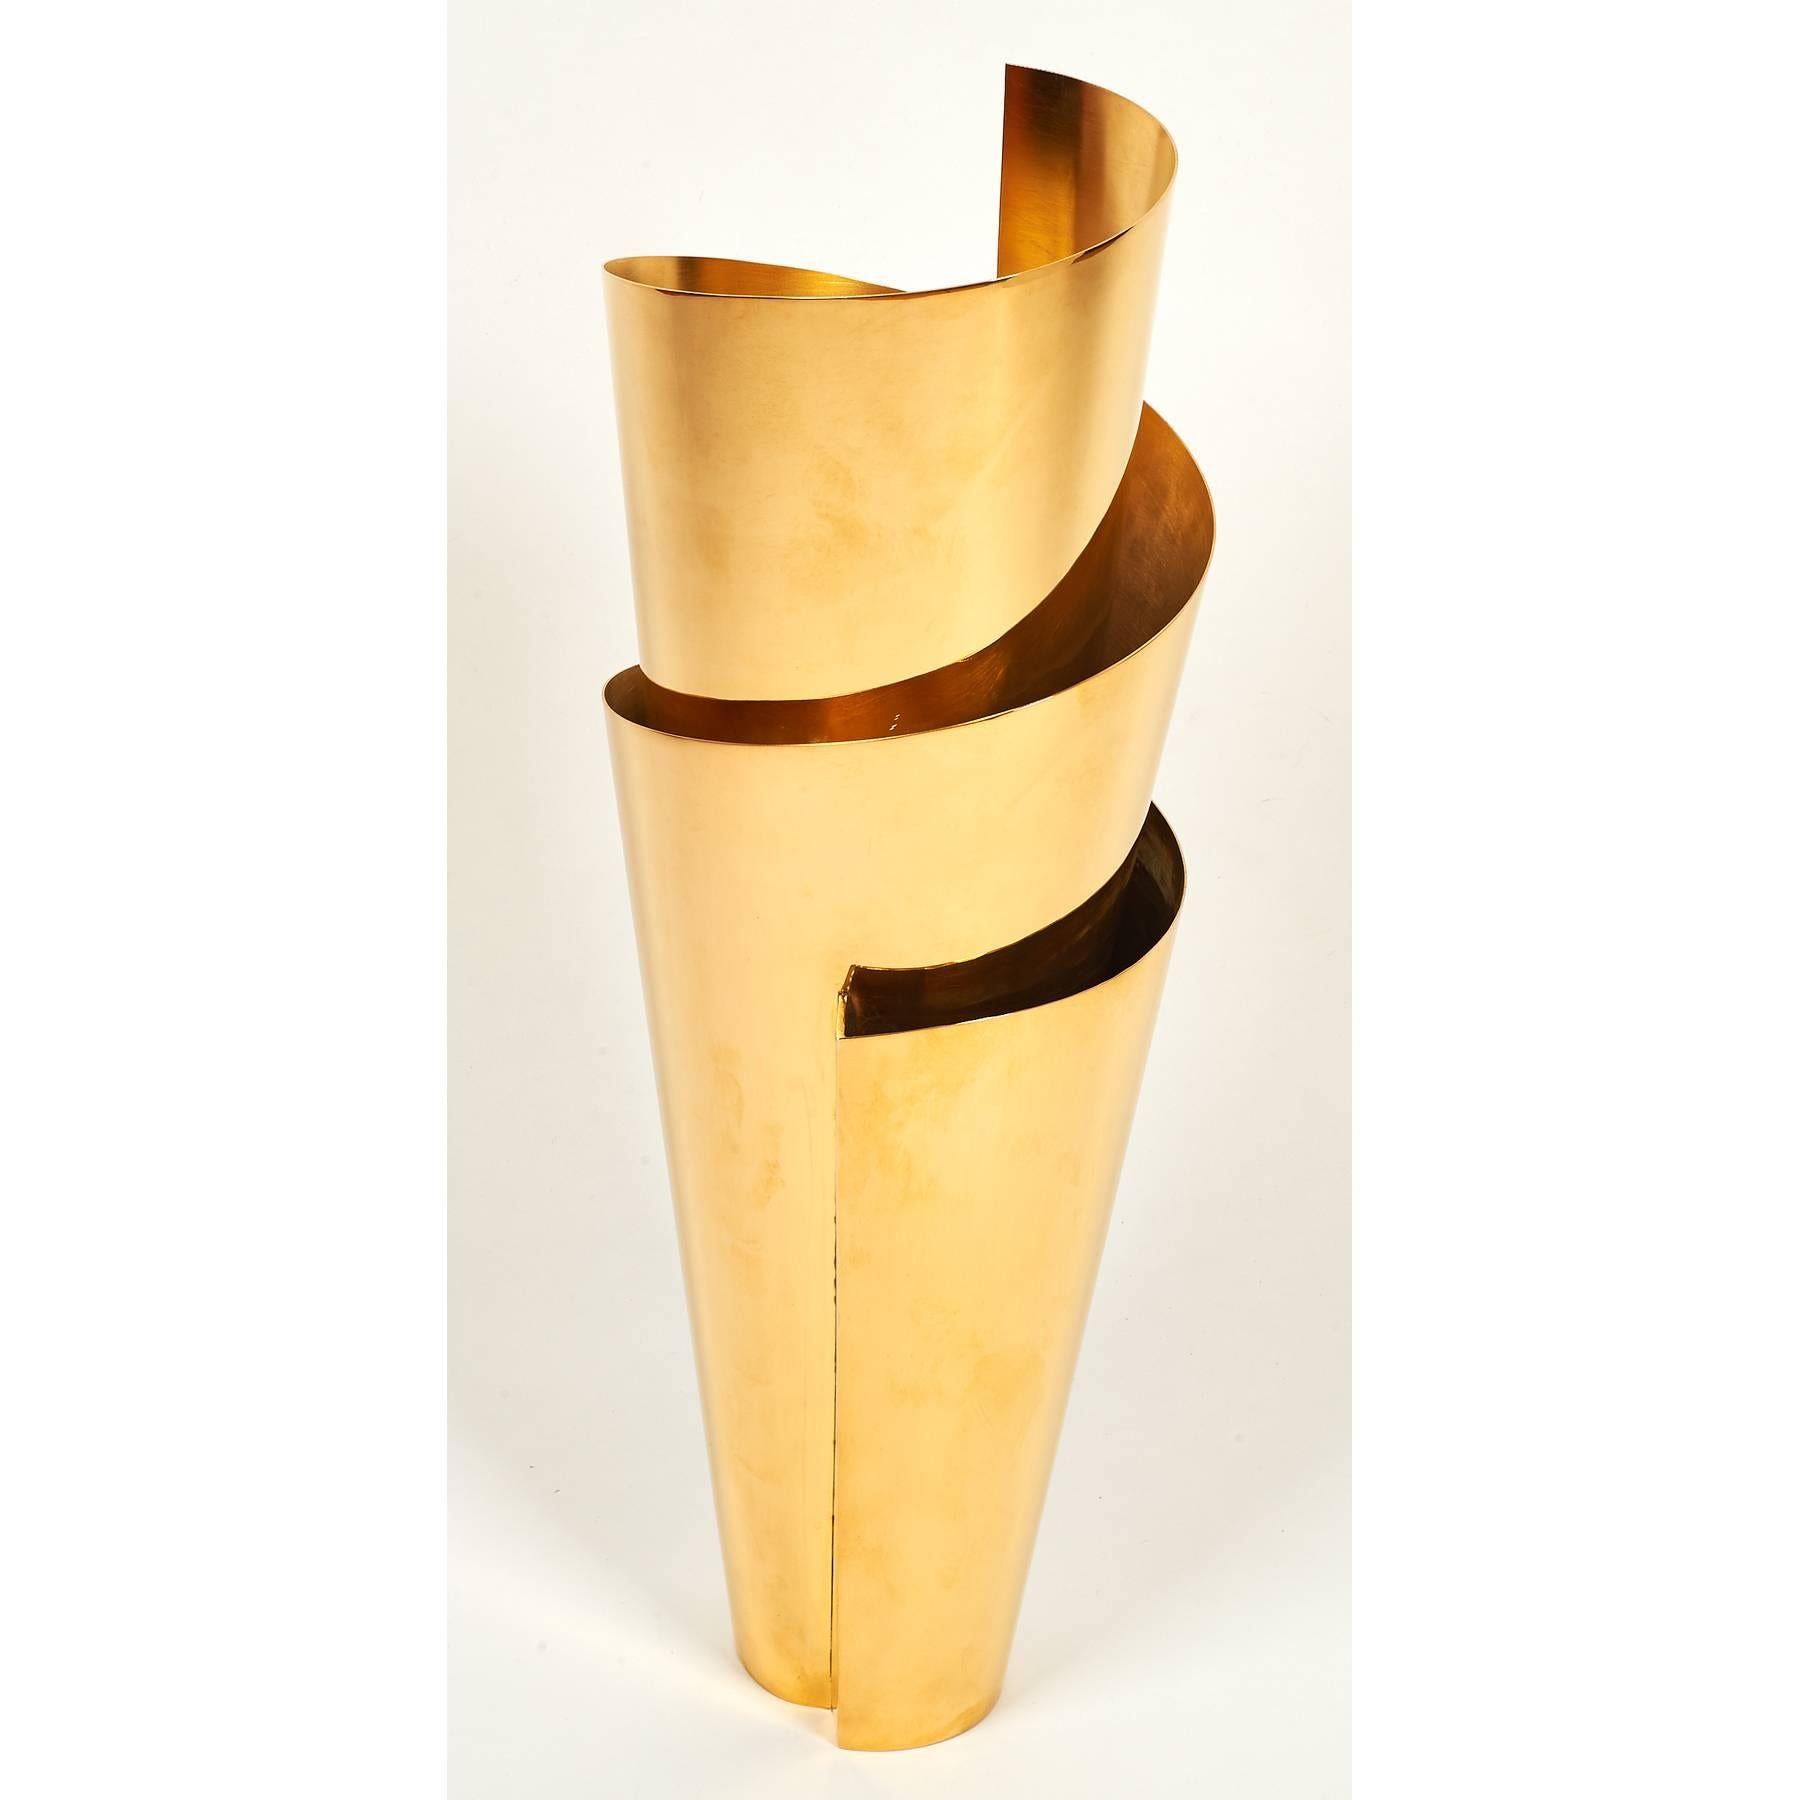 Stefano Casciani (b. 1955)
Spiral vase 
Gilt brass
Artist's proof from an edition of 9, signed
Italy, 2014
24 H x 9 diameter.